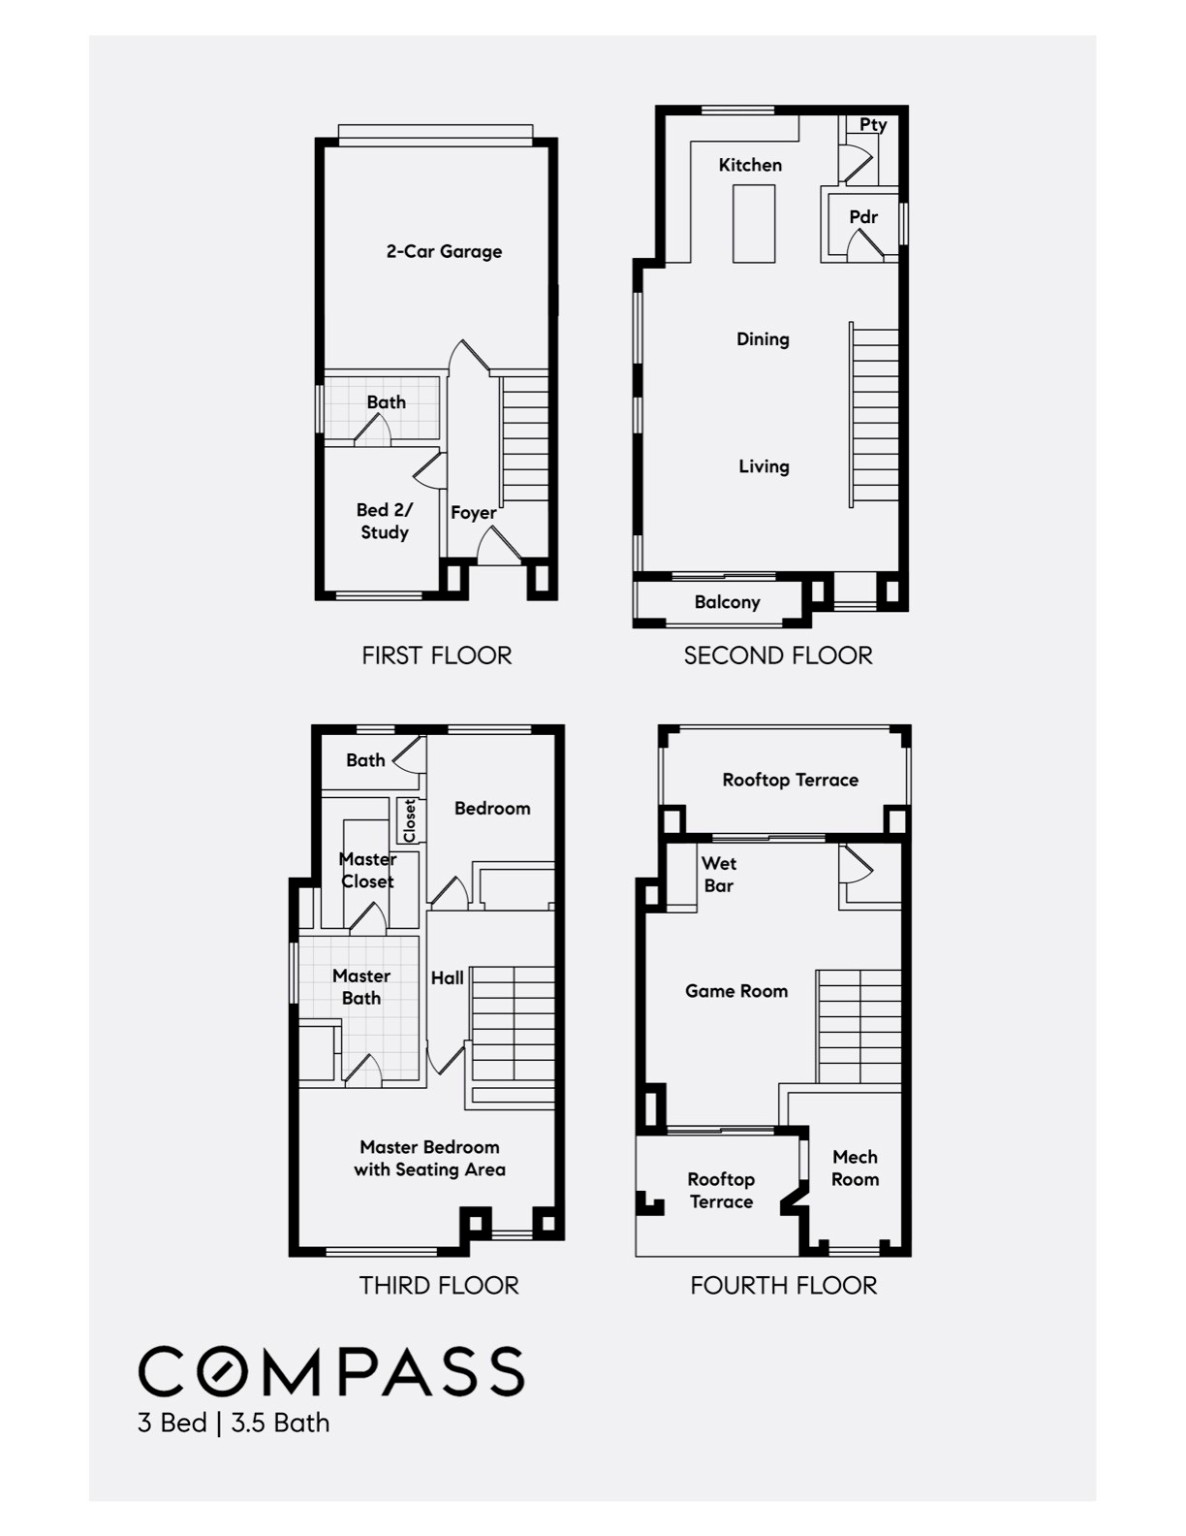 Floor Plan - Document is also uploaded to attachements.